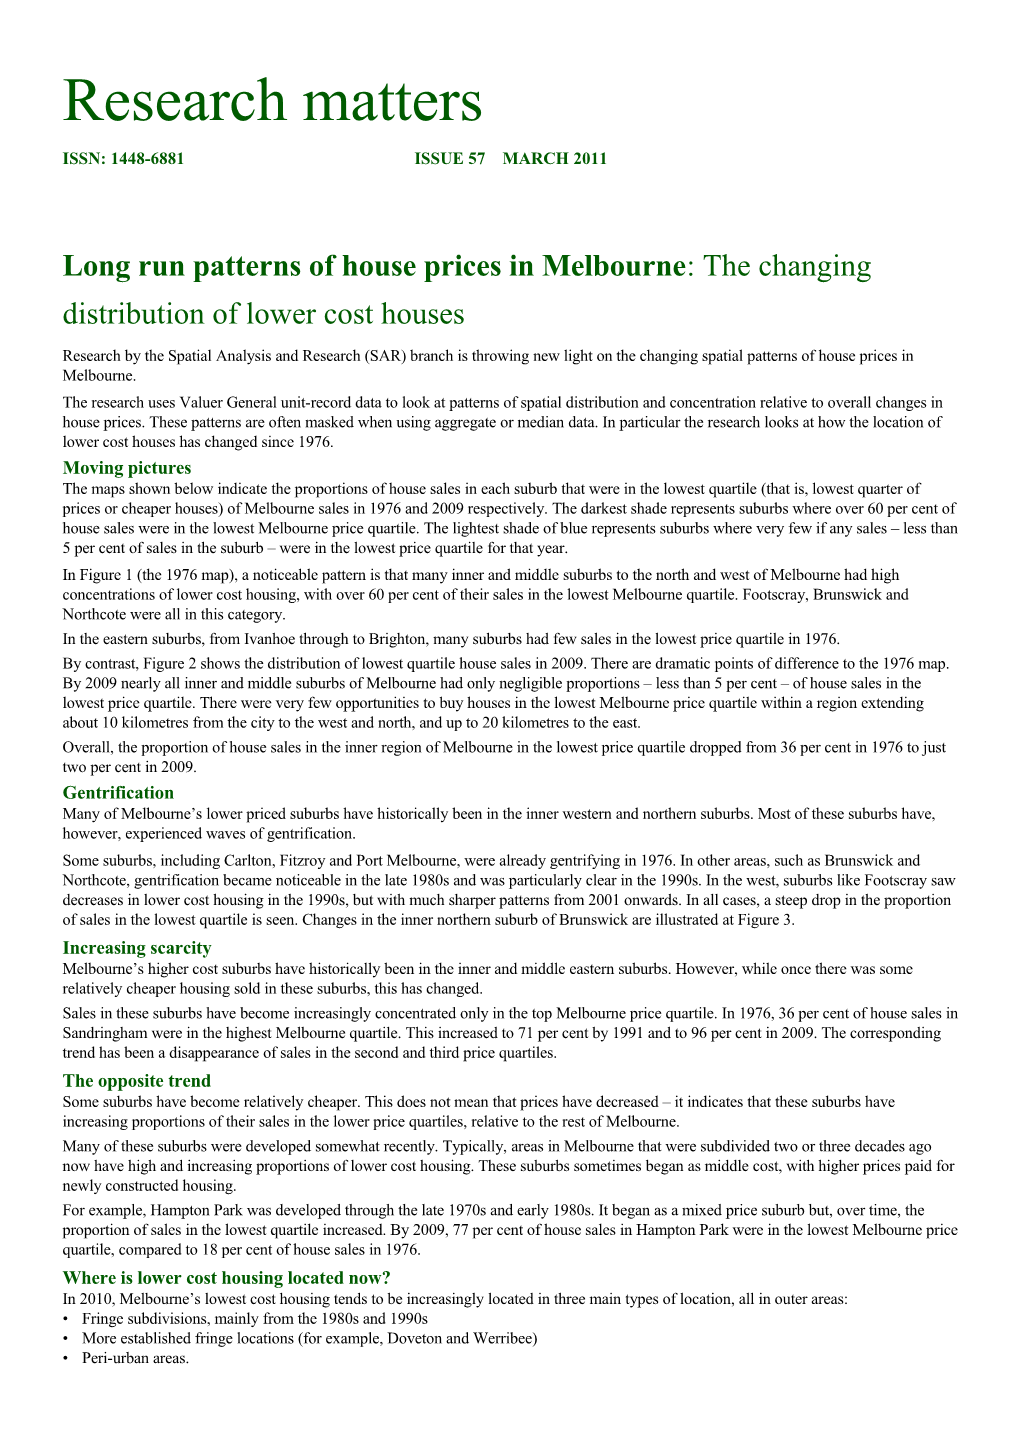 Long Run Patterns of House Prices in Melbourne : the Changing Distribution of Lower Cost Houses